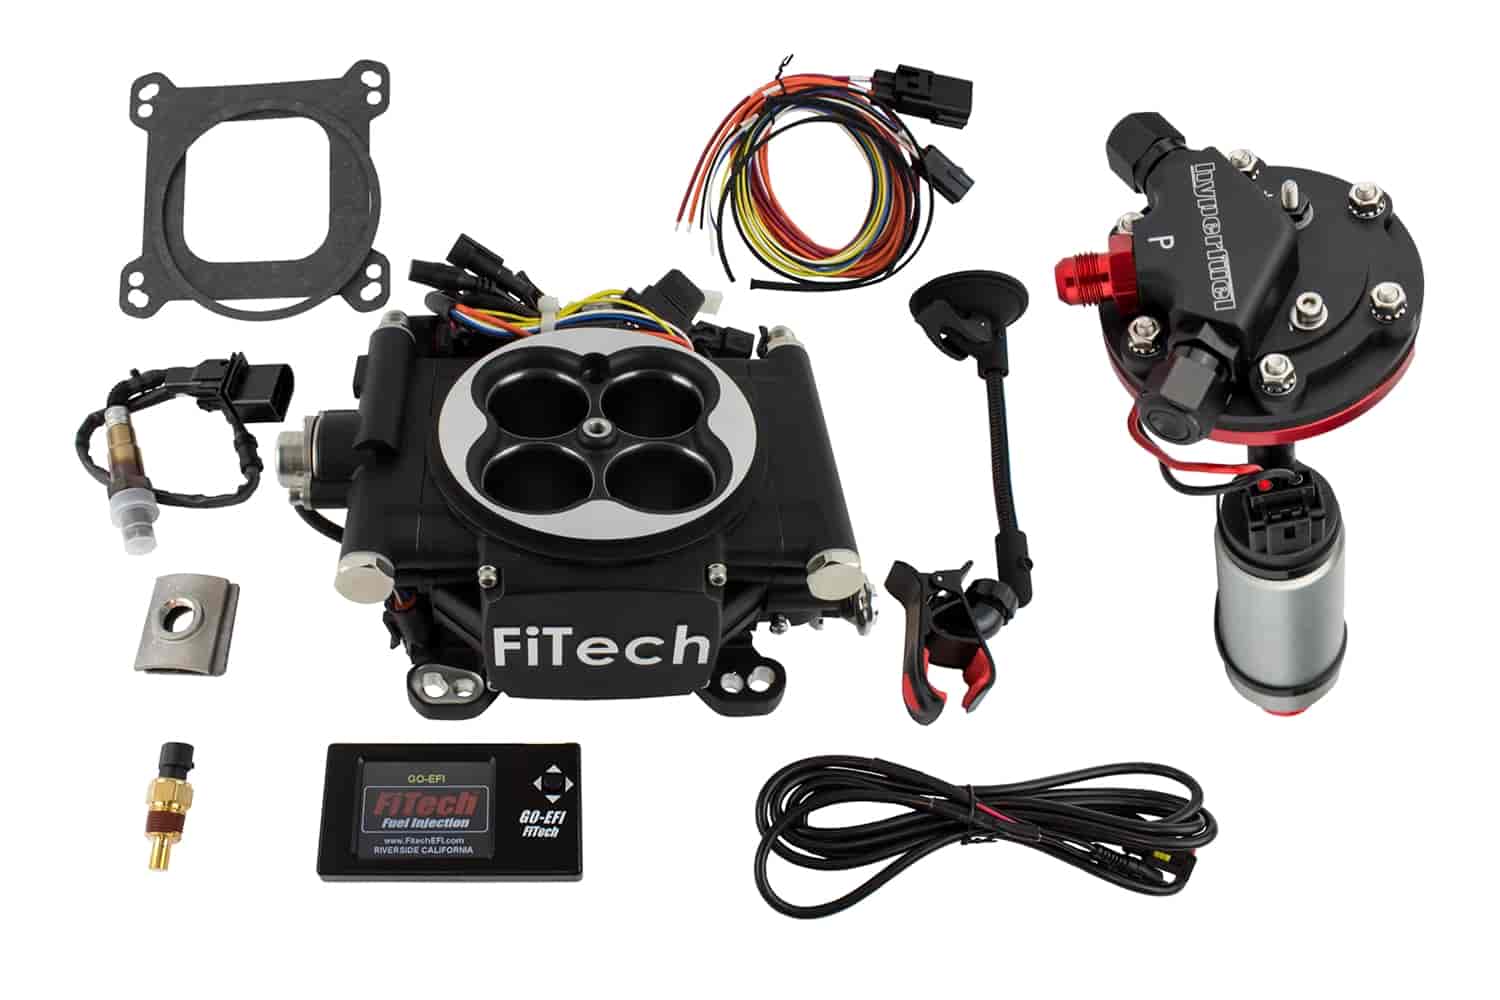 Go EFI-4 600 HP Throttle Body System Master Kit Includes: Hy-Fuel Tight-Fit In-Tank Retrofit Kit